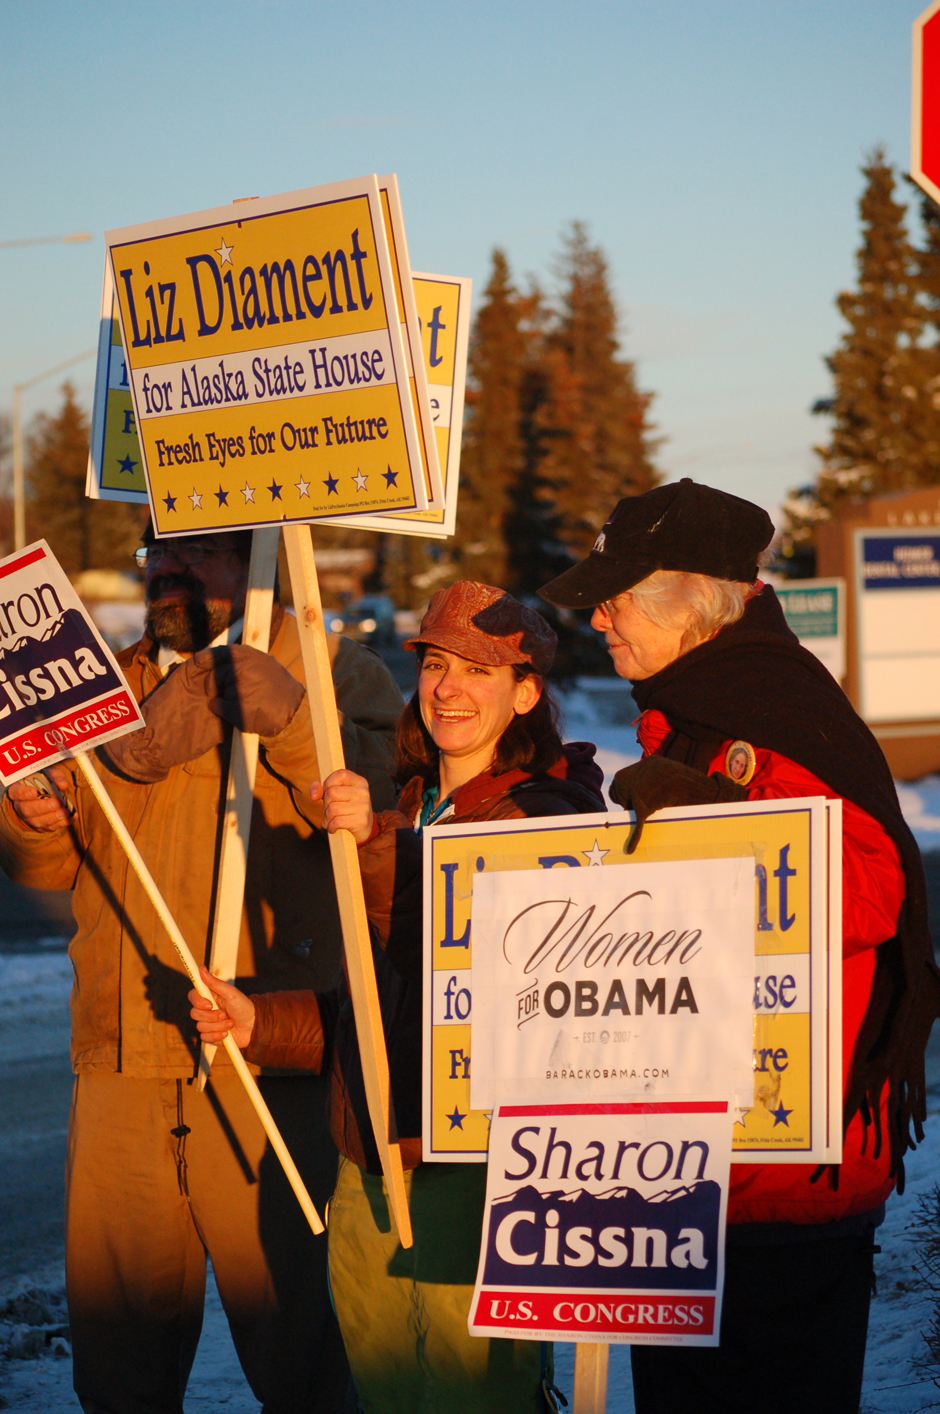 Kate Finn, right, and Gregg Browngoetz help Democratic Party candidate for House District Seat 30 Liz Diament campaign on Pioneer Avenue Tuesday afternoon. Diament and Finn also hold signs for Democratic Party candidate for U.S. House Sharon Cissna.-Photo by Michael Armstrong, Homer News